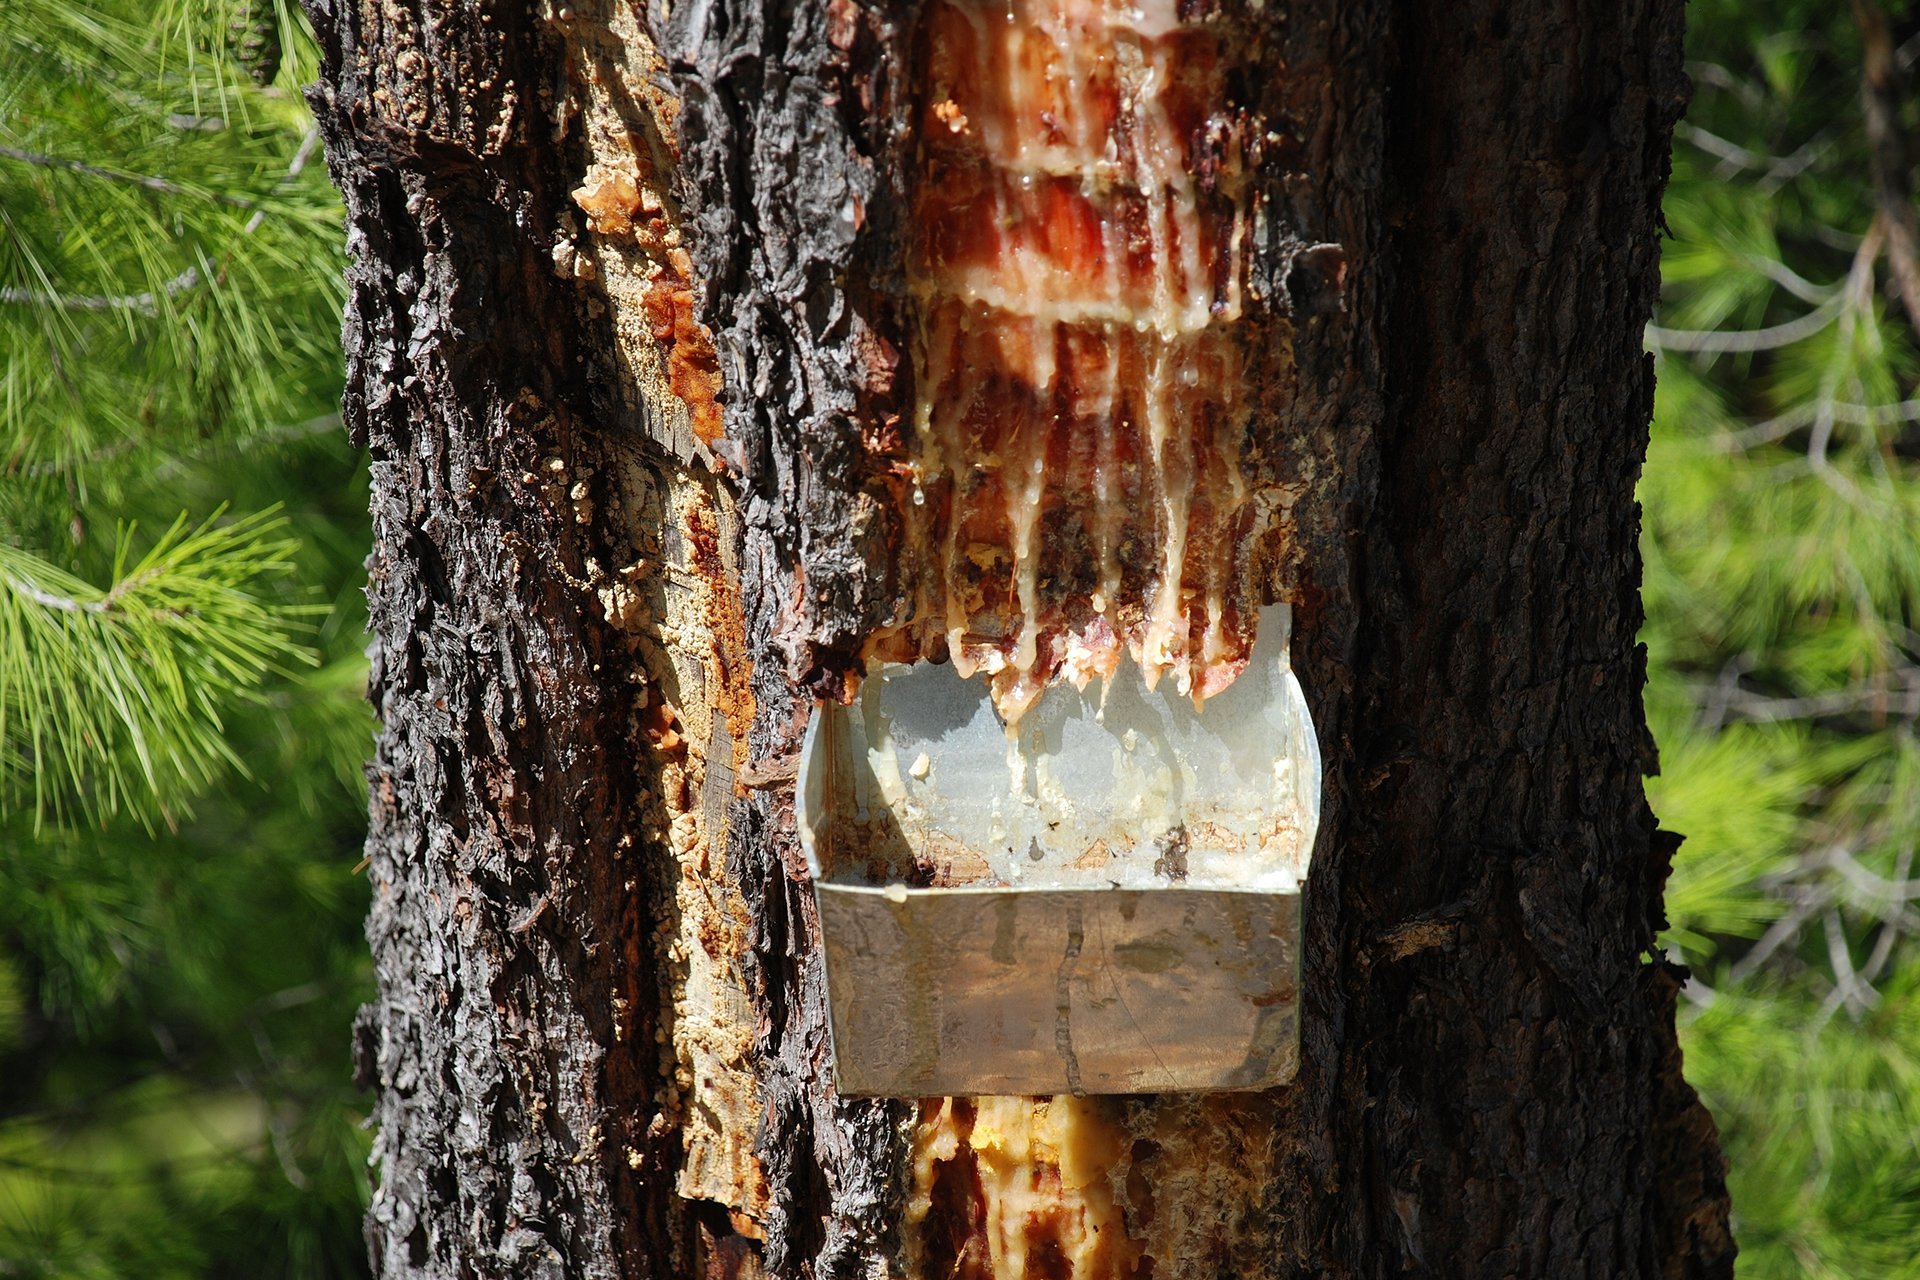 Collecting pine resin from a tree.